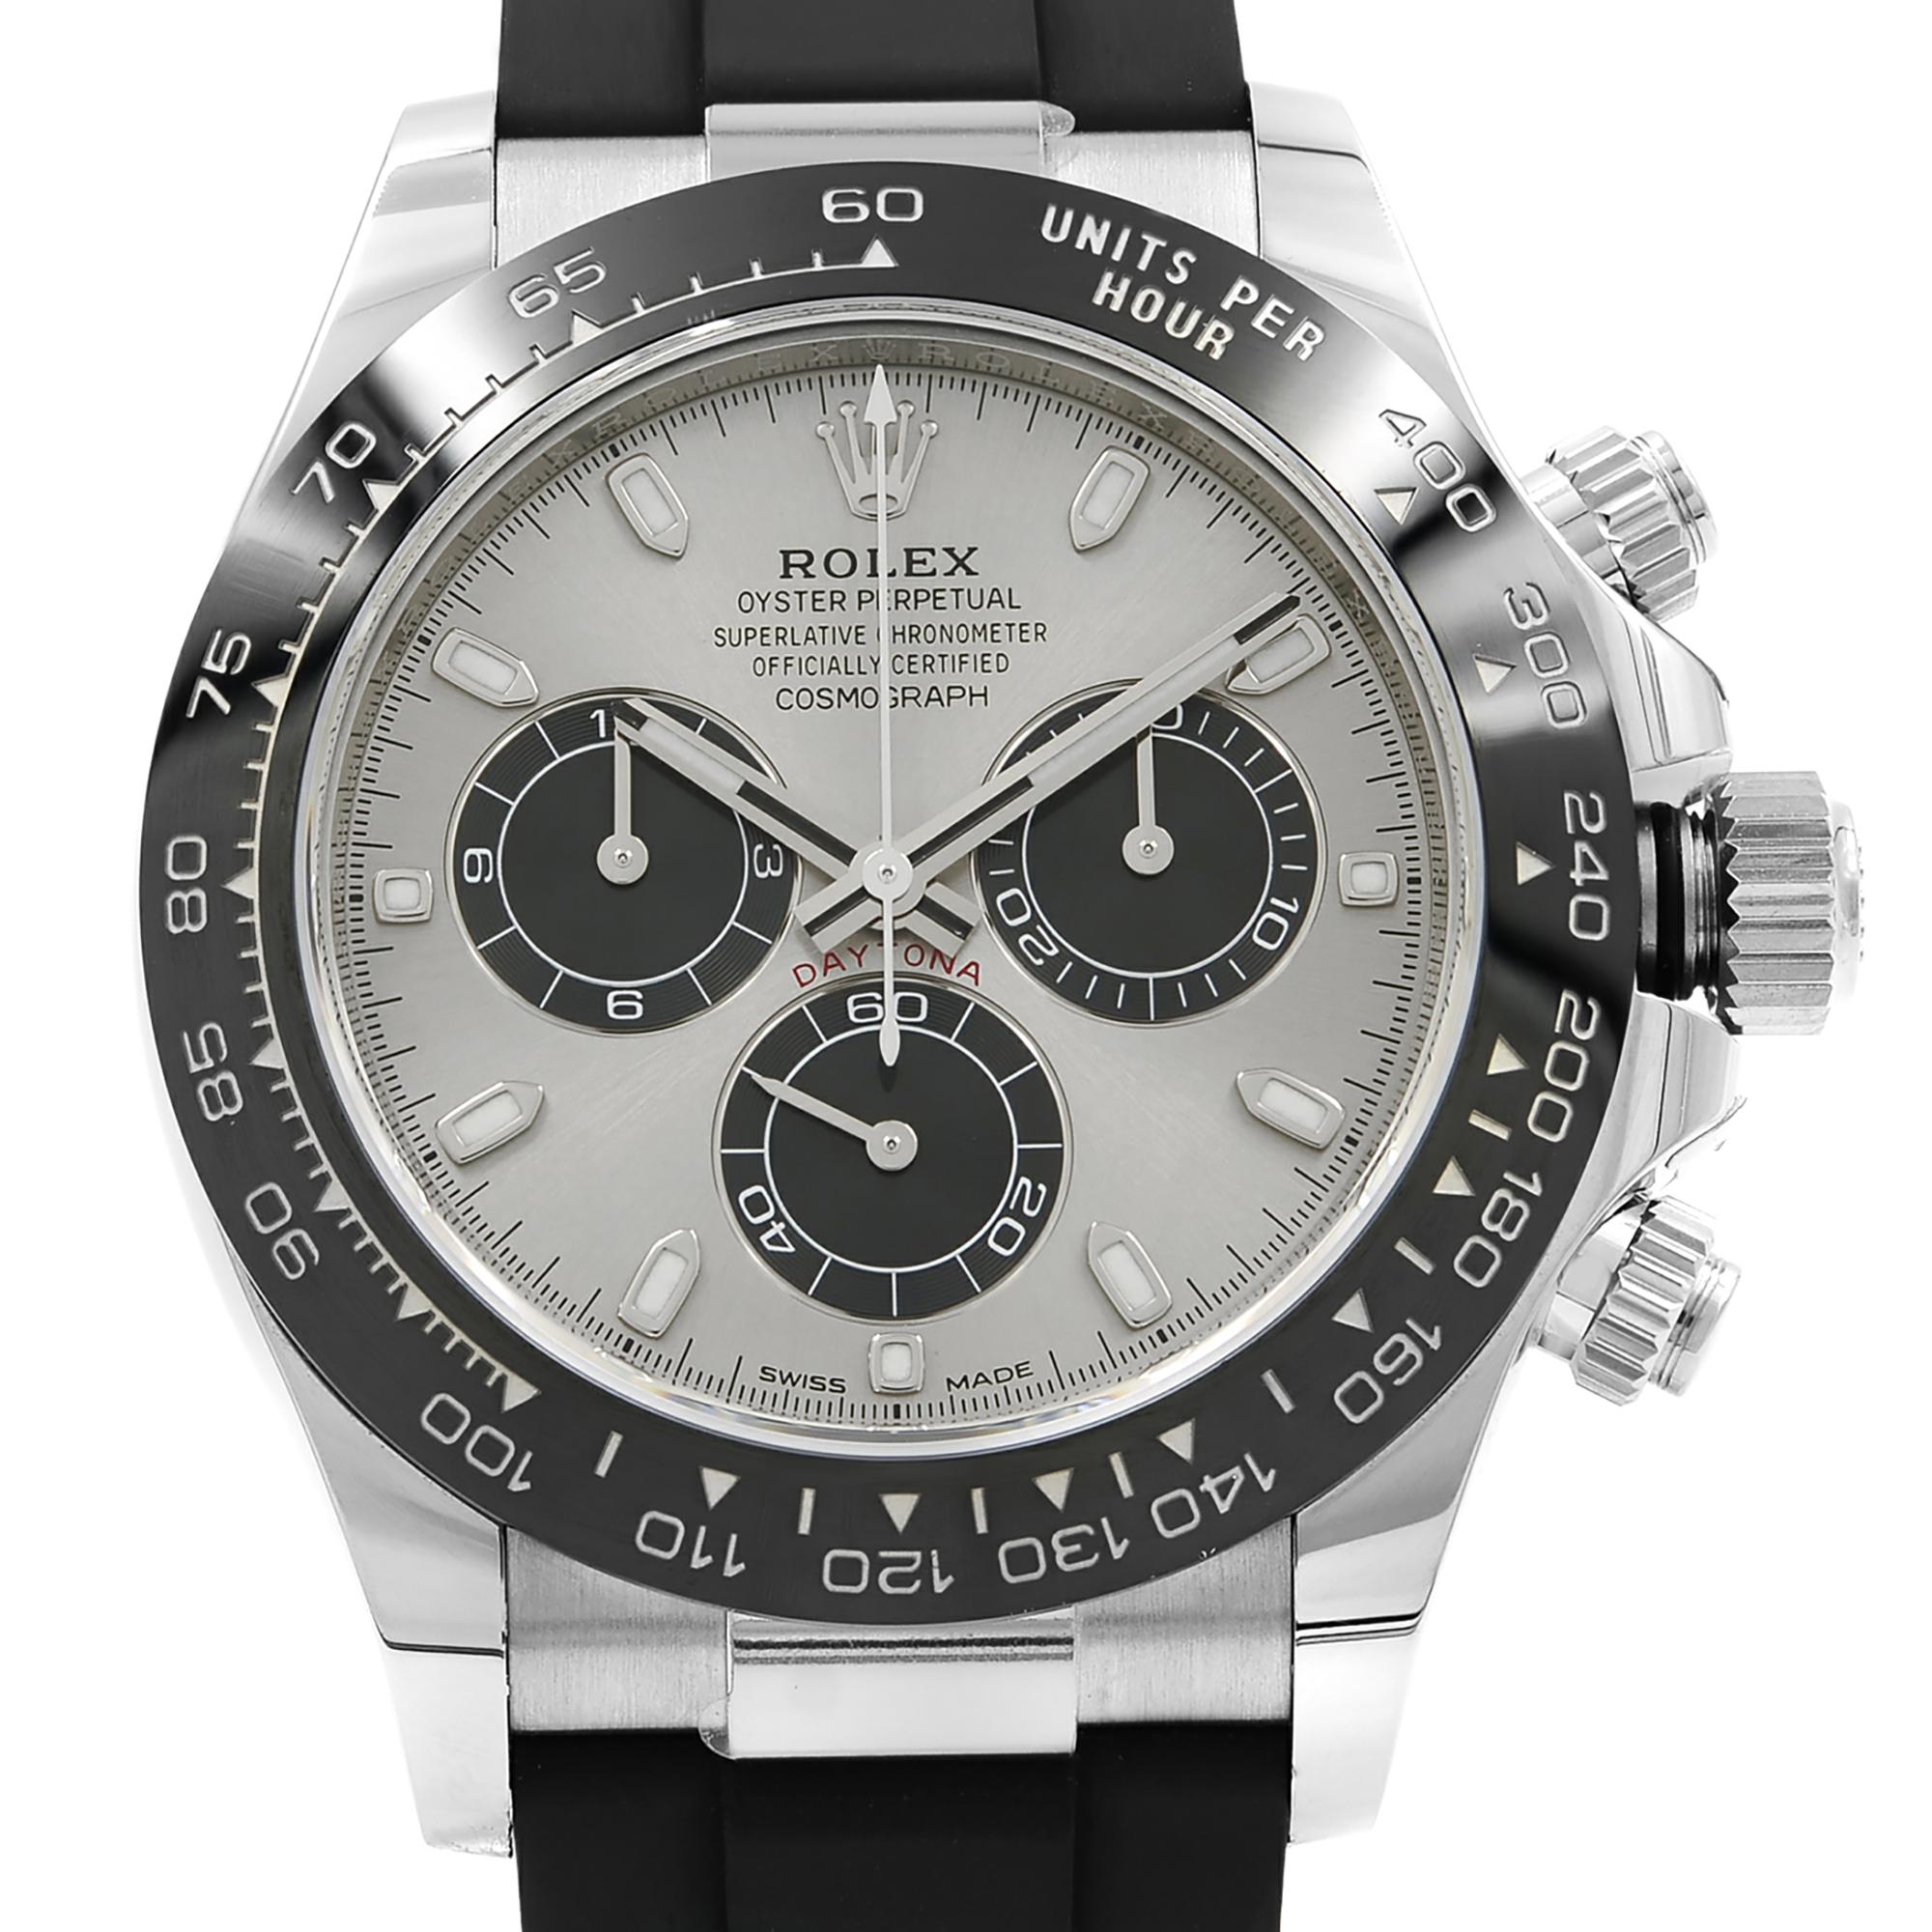 Display Model Rolex Cosmograph Daytona 18K White Gold Ceramic Steel Silver Dial Men's Watch 116519LN. December 2020 New Card. Original Box and Papers are Included. Covered by 3-year Chronostore Warranty.
Details:
Brand Rolex
Department Men
Model